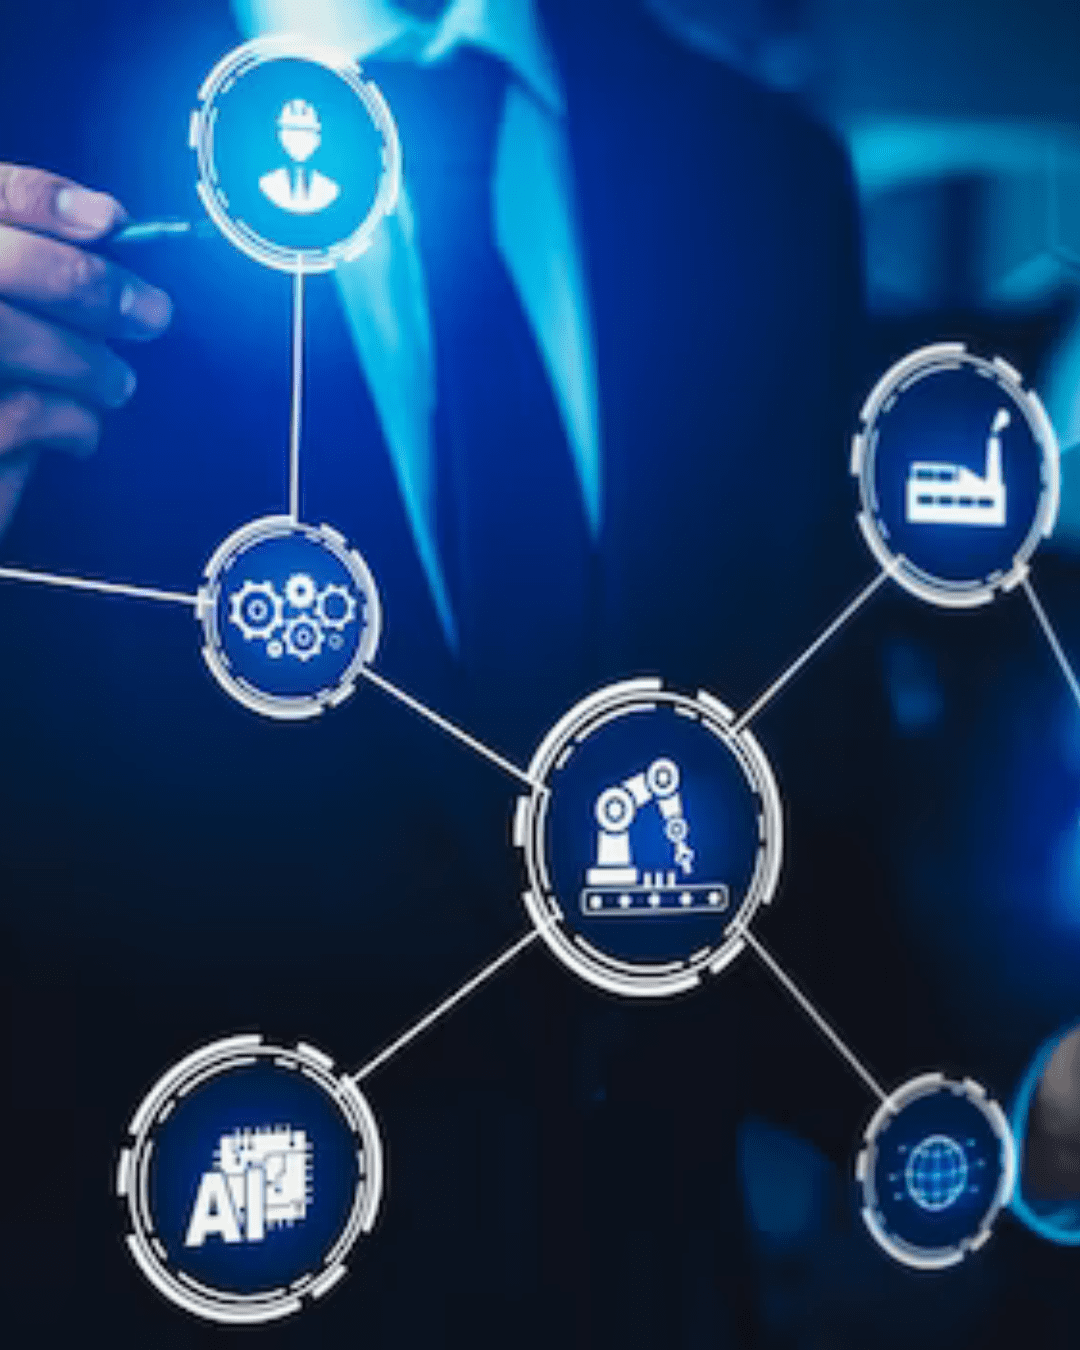 A person in a suit is pointing at interconnected digital icons representing various industry concepts: a factory, artificial intelligence, gear mechanisms, a robotic arm, a globe, and 24/7 threat visibility. The scene is lit with blue and black tones, suggesting a high-tech environment.